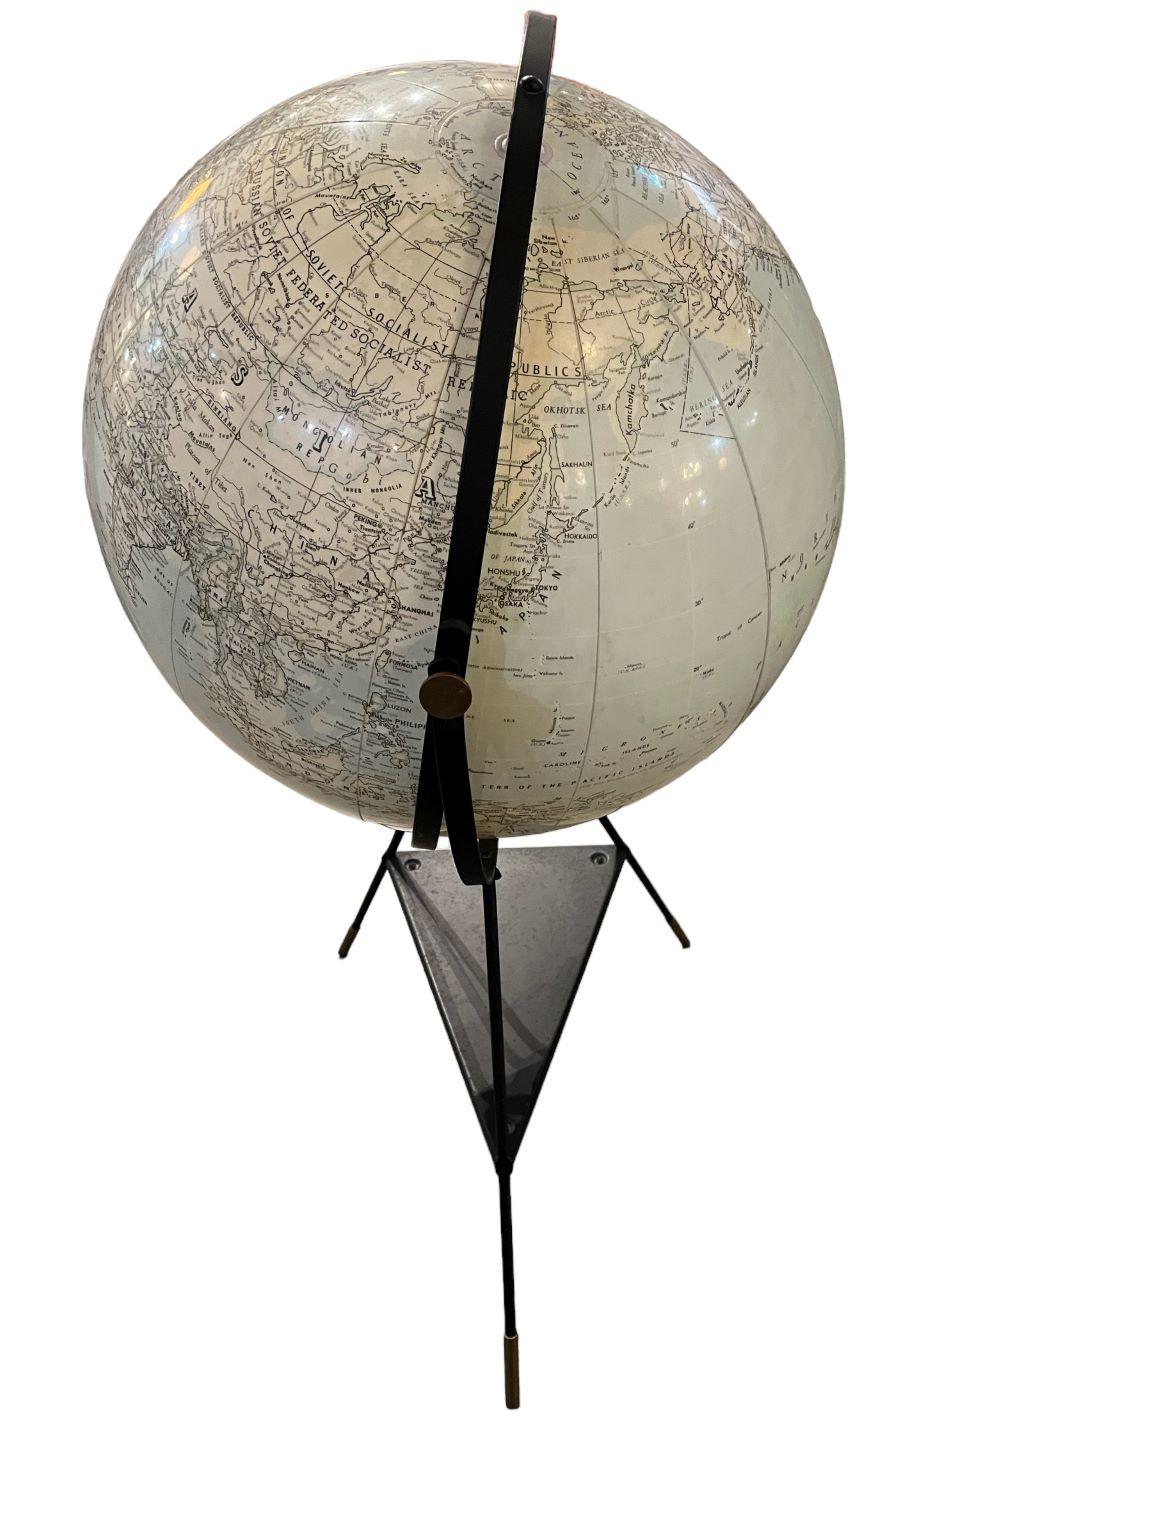 Hammond's International Globe circa 1955 composed of an inflatable globe on painted metal tripod base. Durable as a beach ball, this vinyl globe is inflatable / deflatable by way of a locking port mechanism located at the top of the globe.